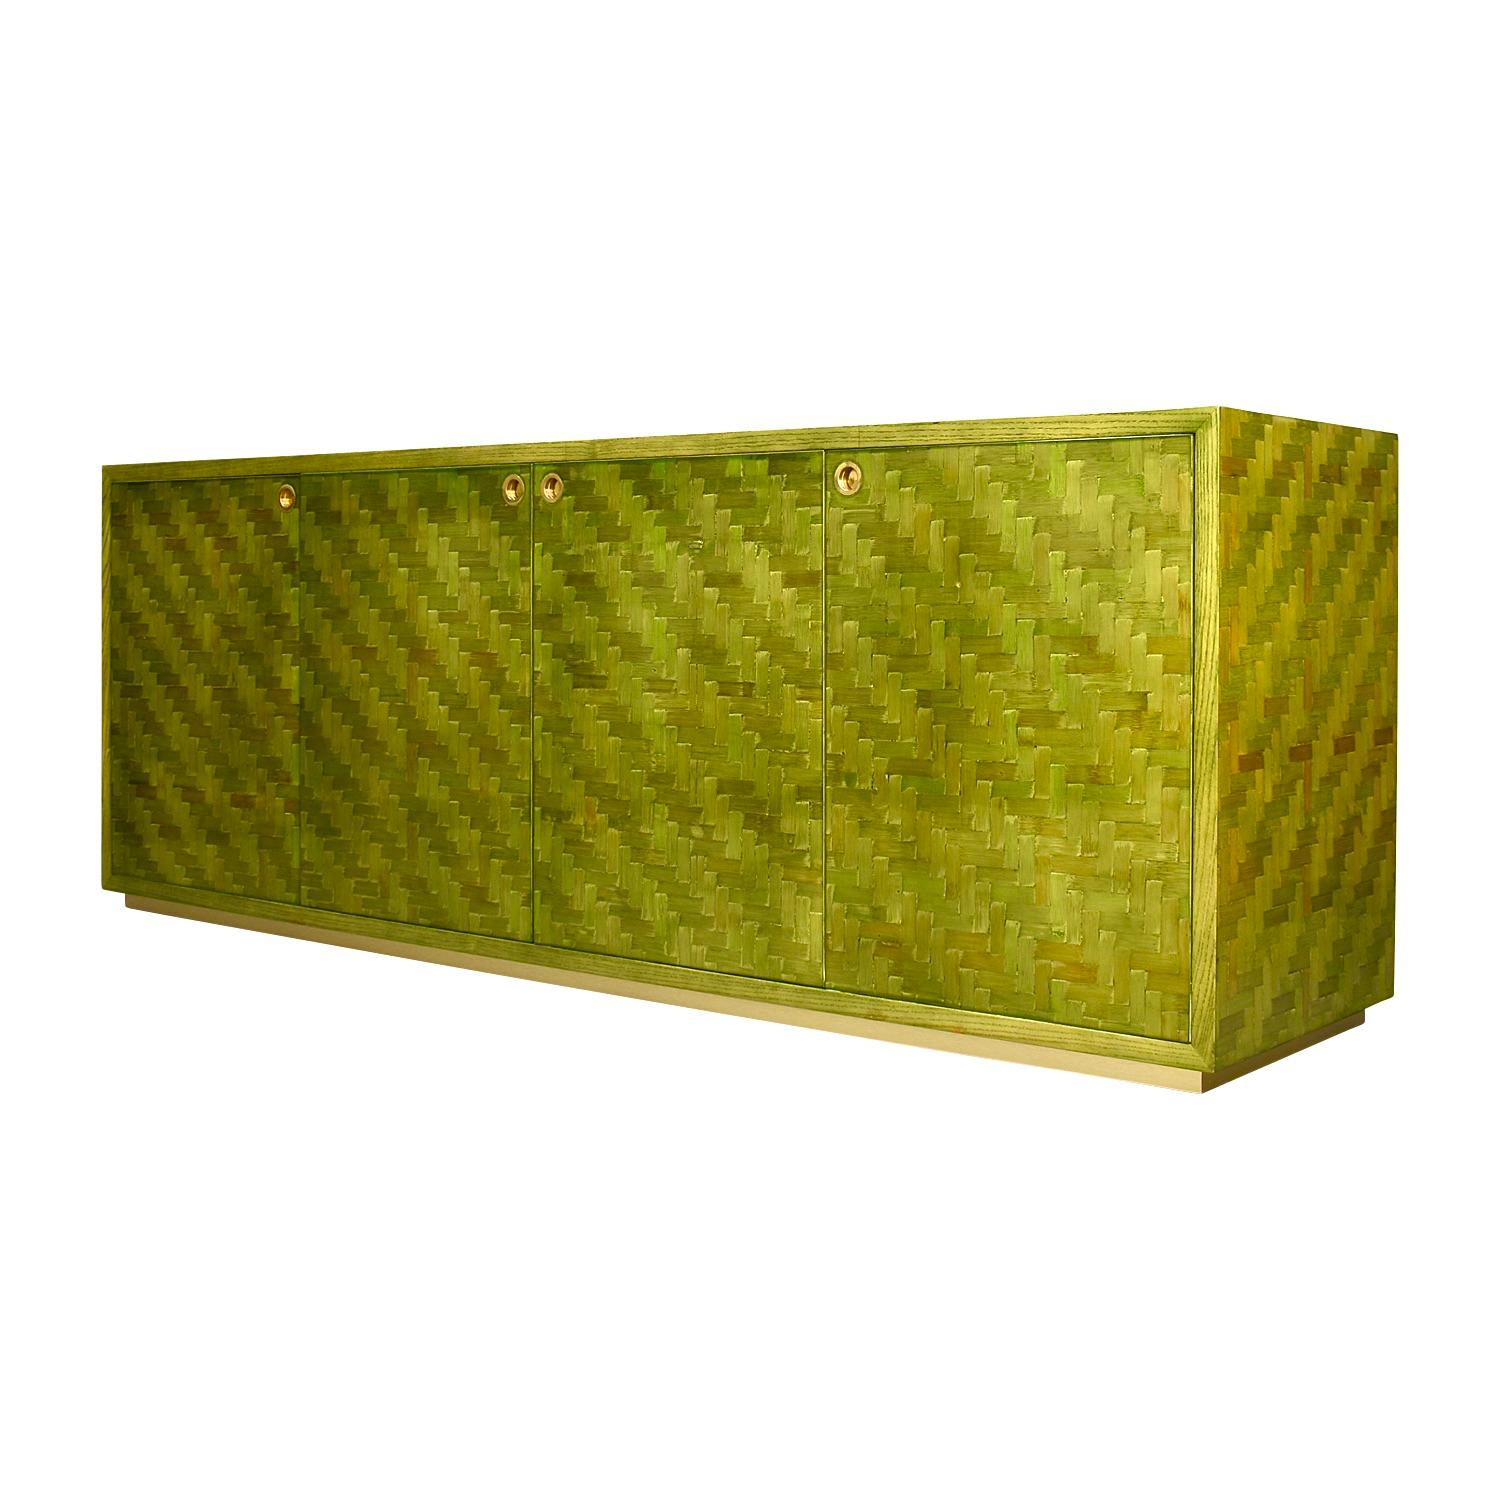 Mid-Century Modern Italian Mosaic Credenza in Green Palm Leaf and Brass by Smania, Italy circa 1970